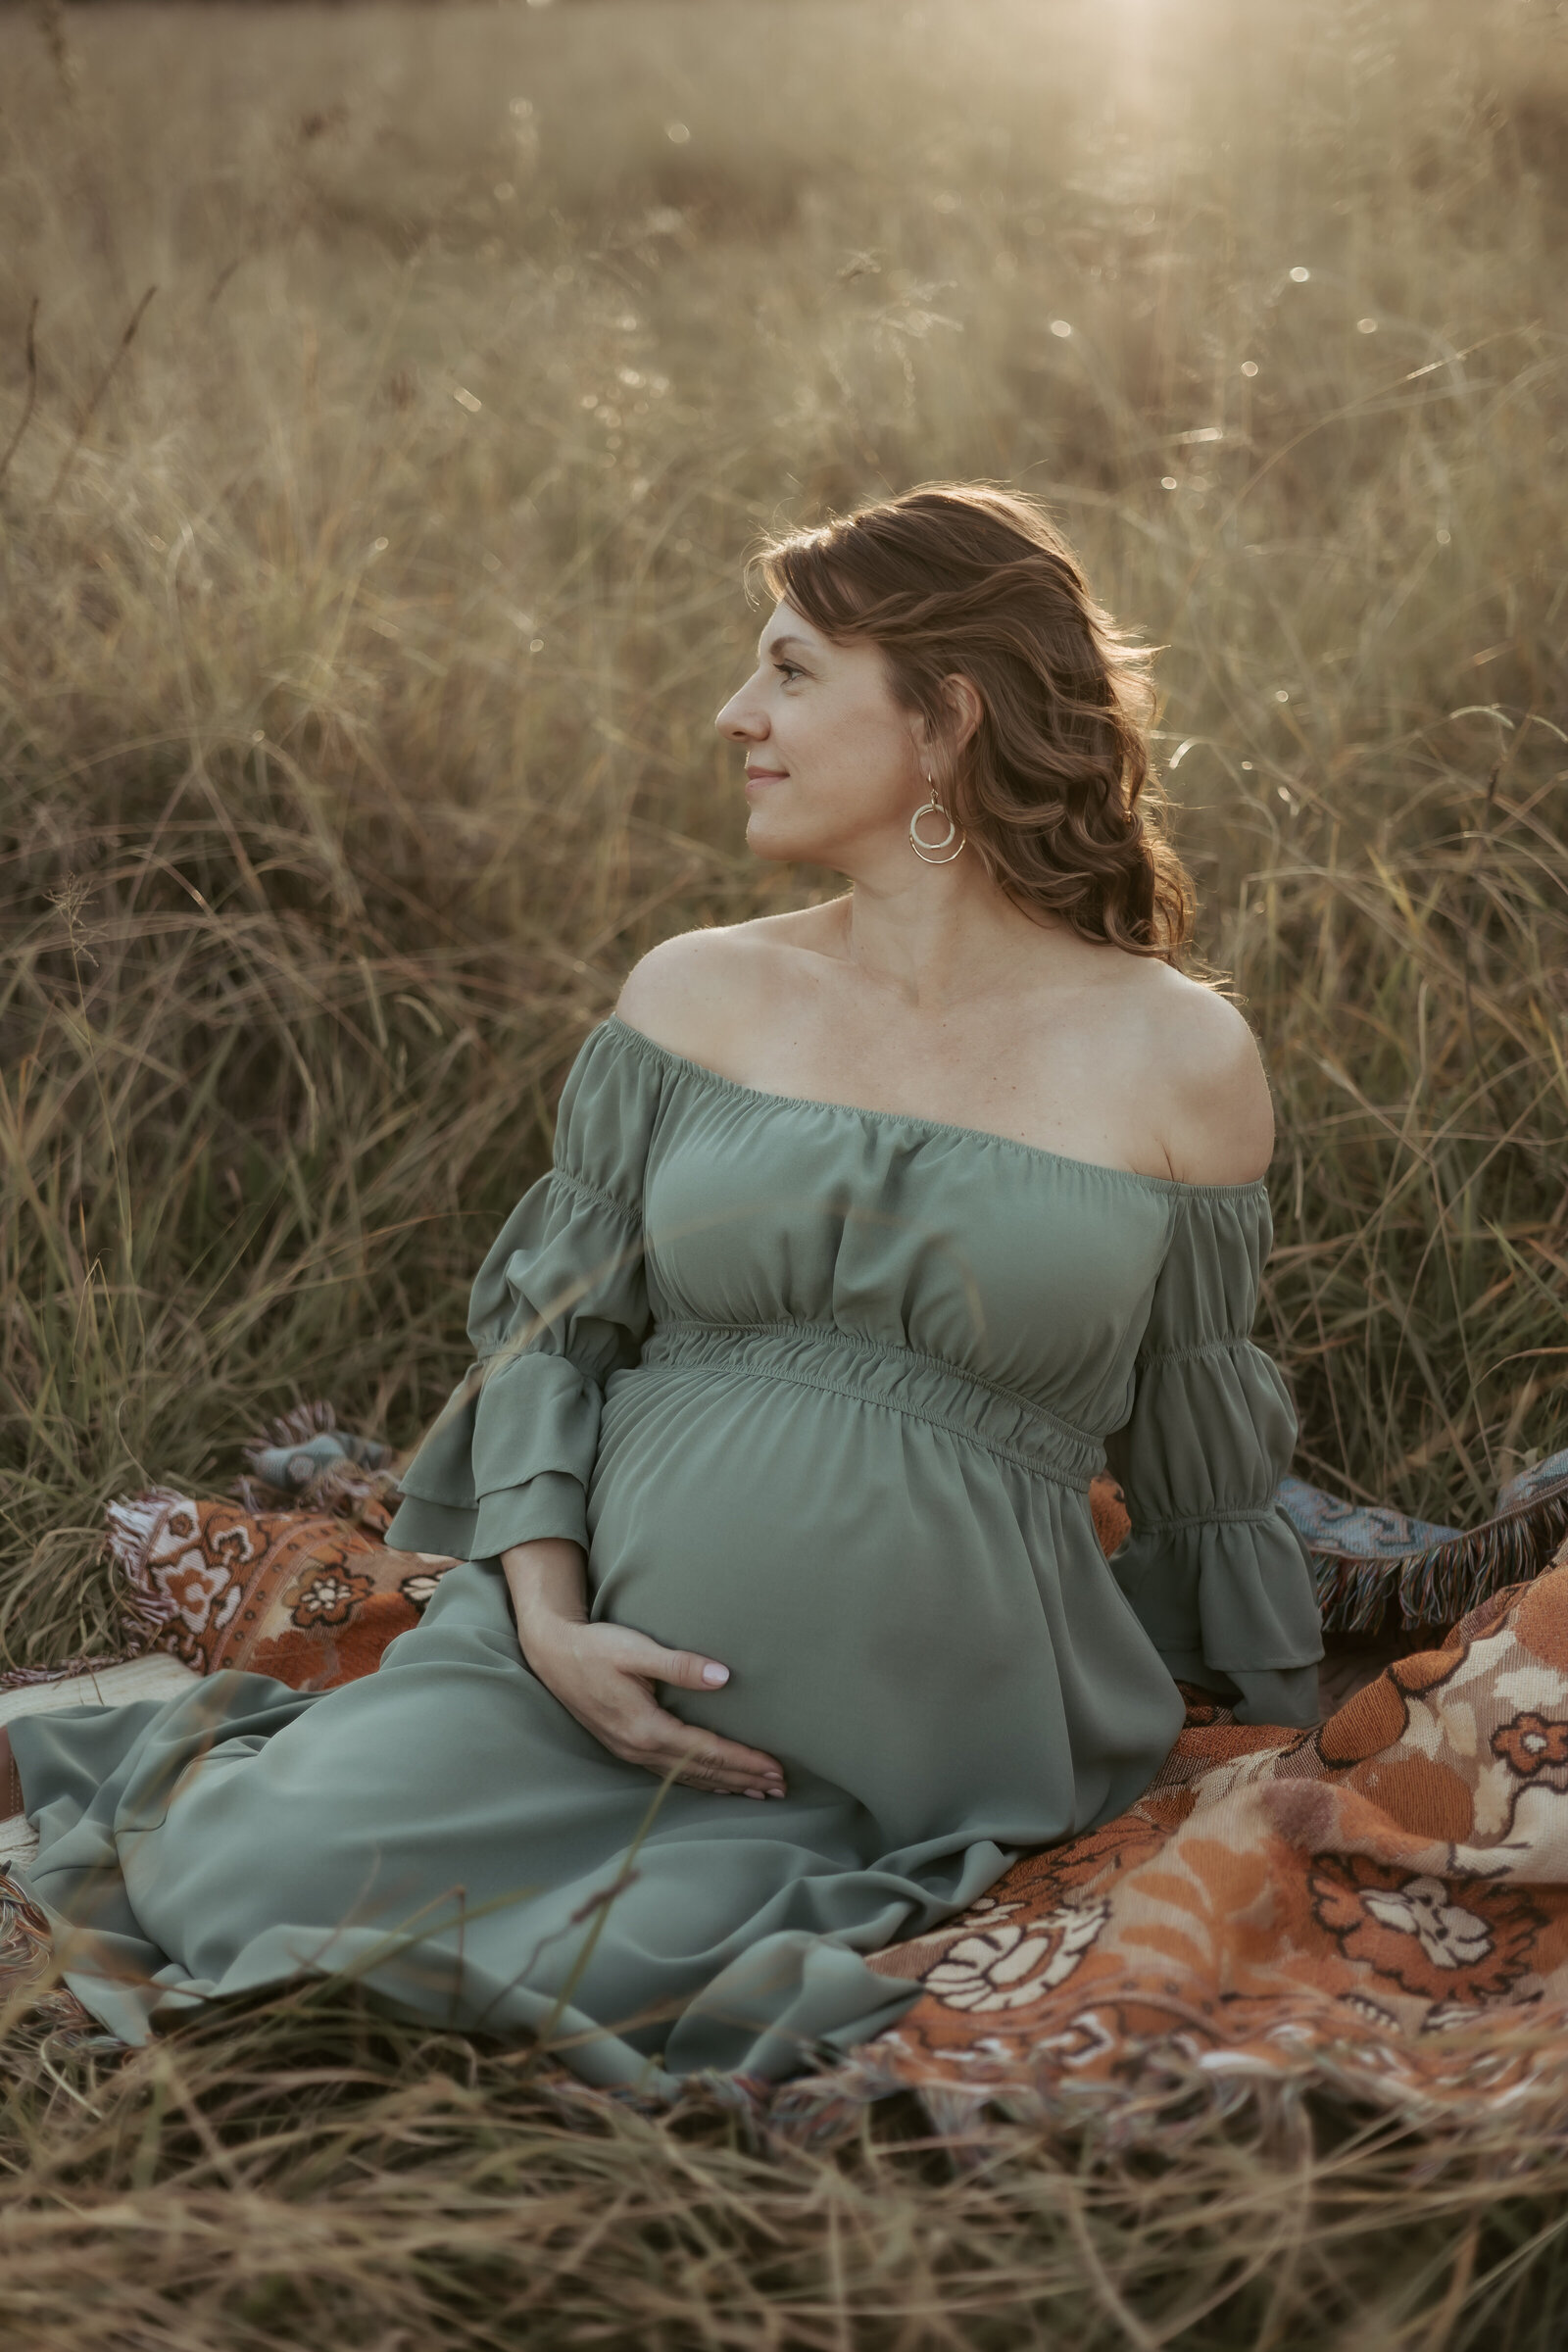 Stunning pregnant woman in off the shoulder green dress sitting in a lovely field holding her bump while the sun glows in her hair like a halo